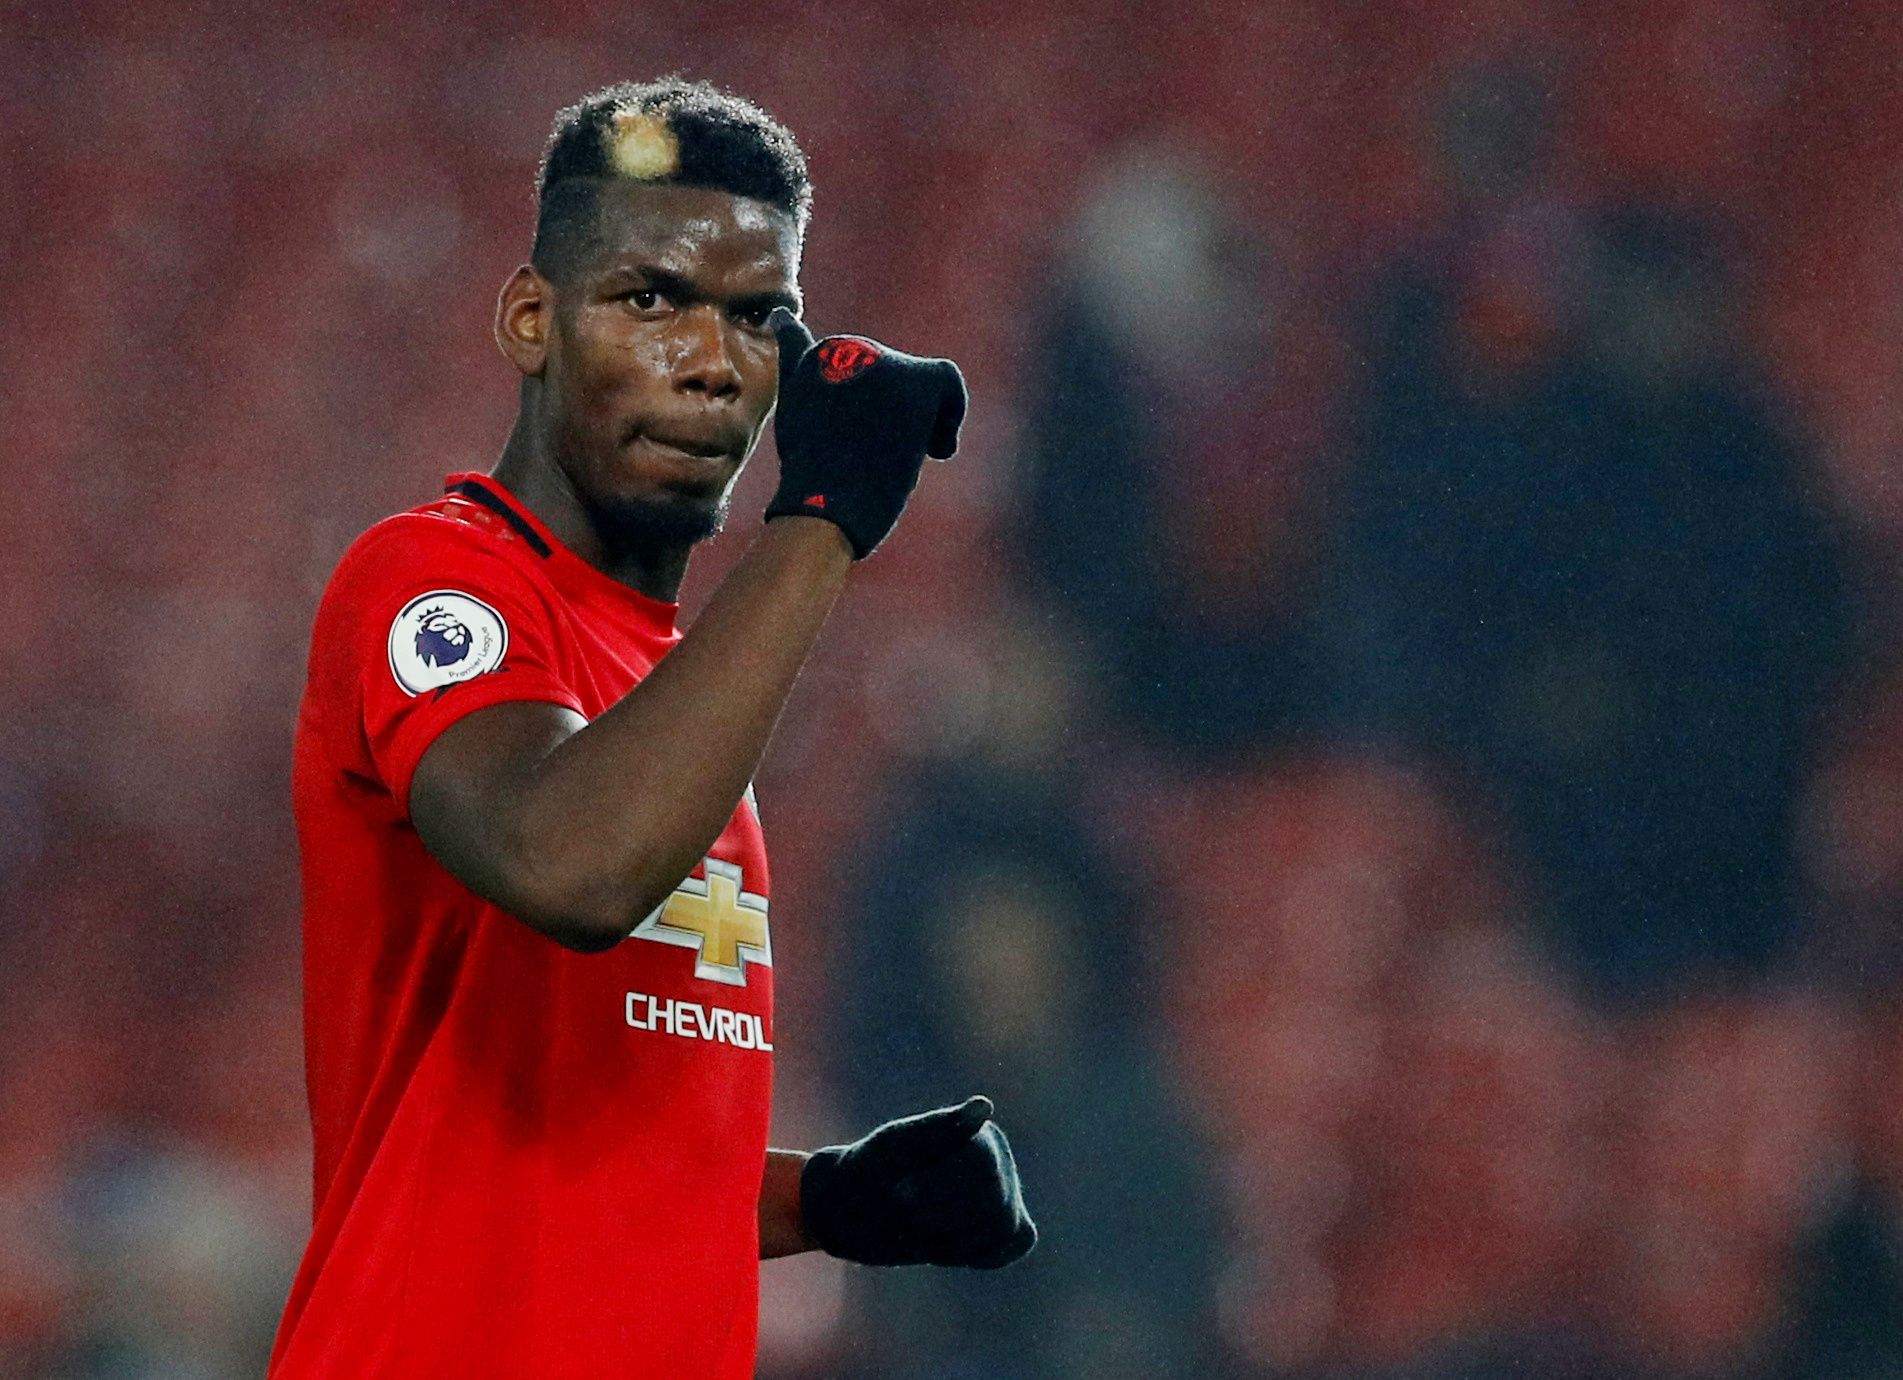 Manchester United midfielder Paul Pogba Manchester United Ole Gunnar Solskjaer Bruno Fernandes Scott McTominay Facundo Pellistri occer Football - Premier League - Manchester United v Newcastle United - Old Trafford, Manchester, Britain - December 26, 2019  Manchester United's Paul Pogba acknowledges fans after the match          REUTERS/Phil Noble  EDITORIAL USE ONLY. No use with unauthorized audio, video, data, fixture lists, club/league logos or "live" services. Online in-match use limited to 